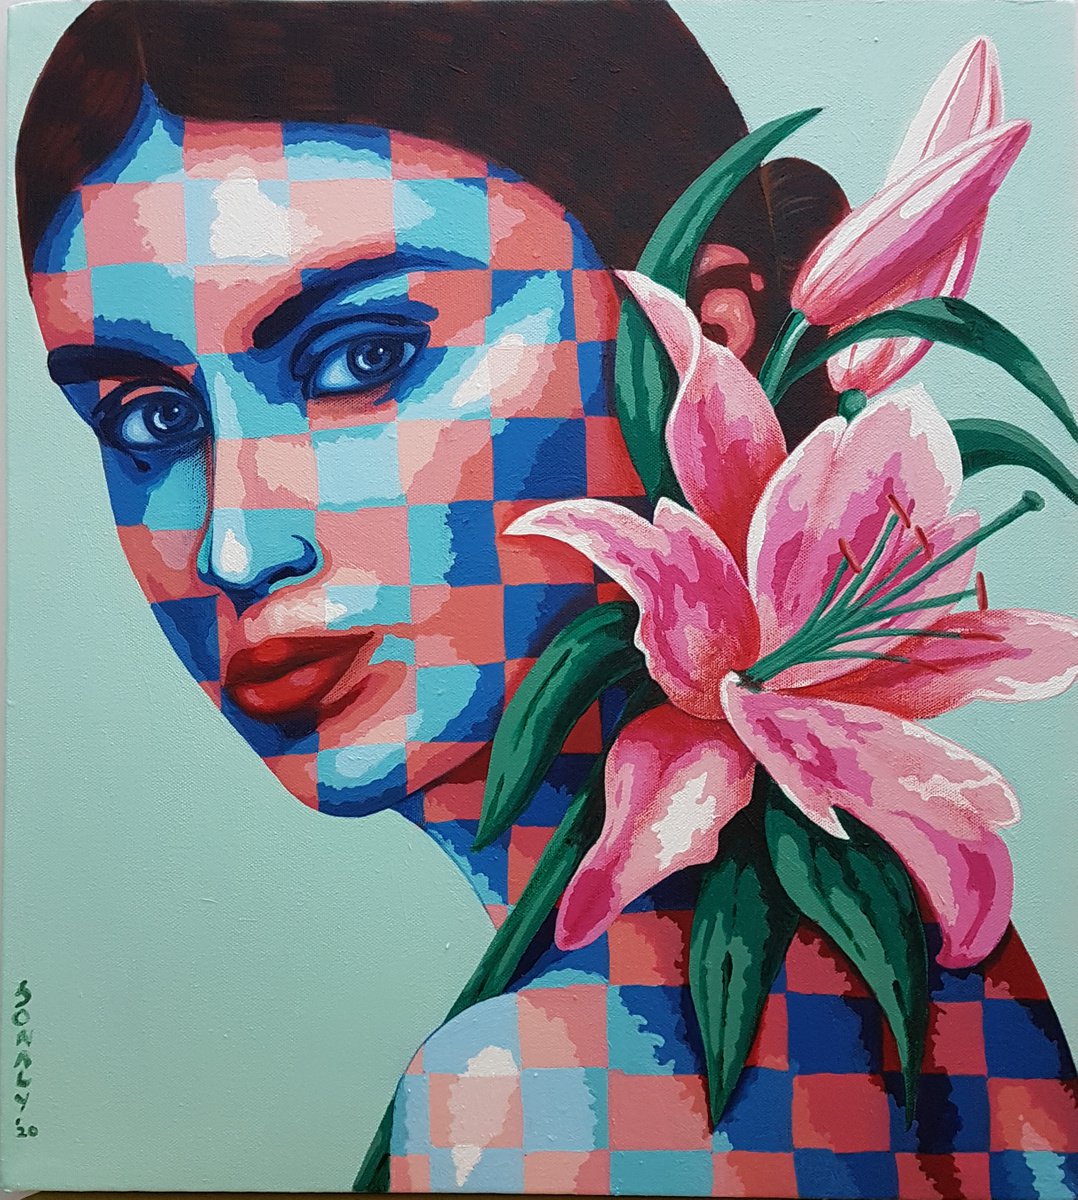 Lady and Lilies by Sonaly Gandhi